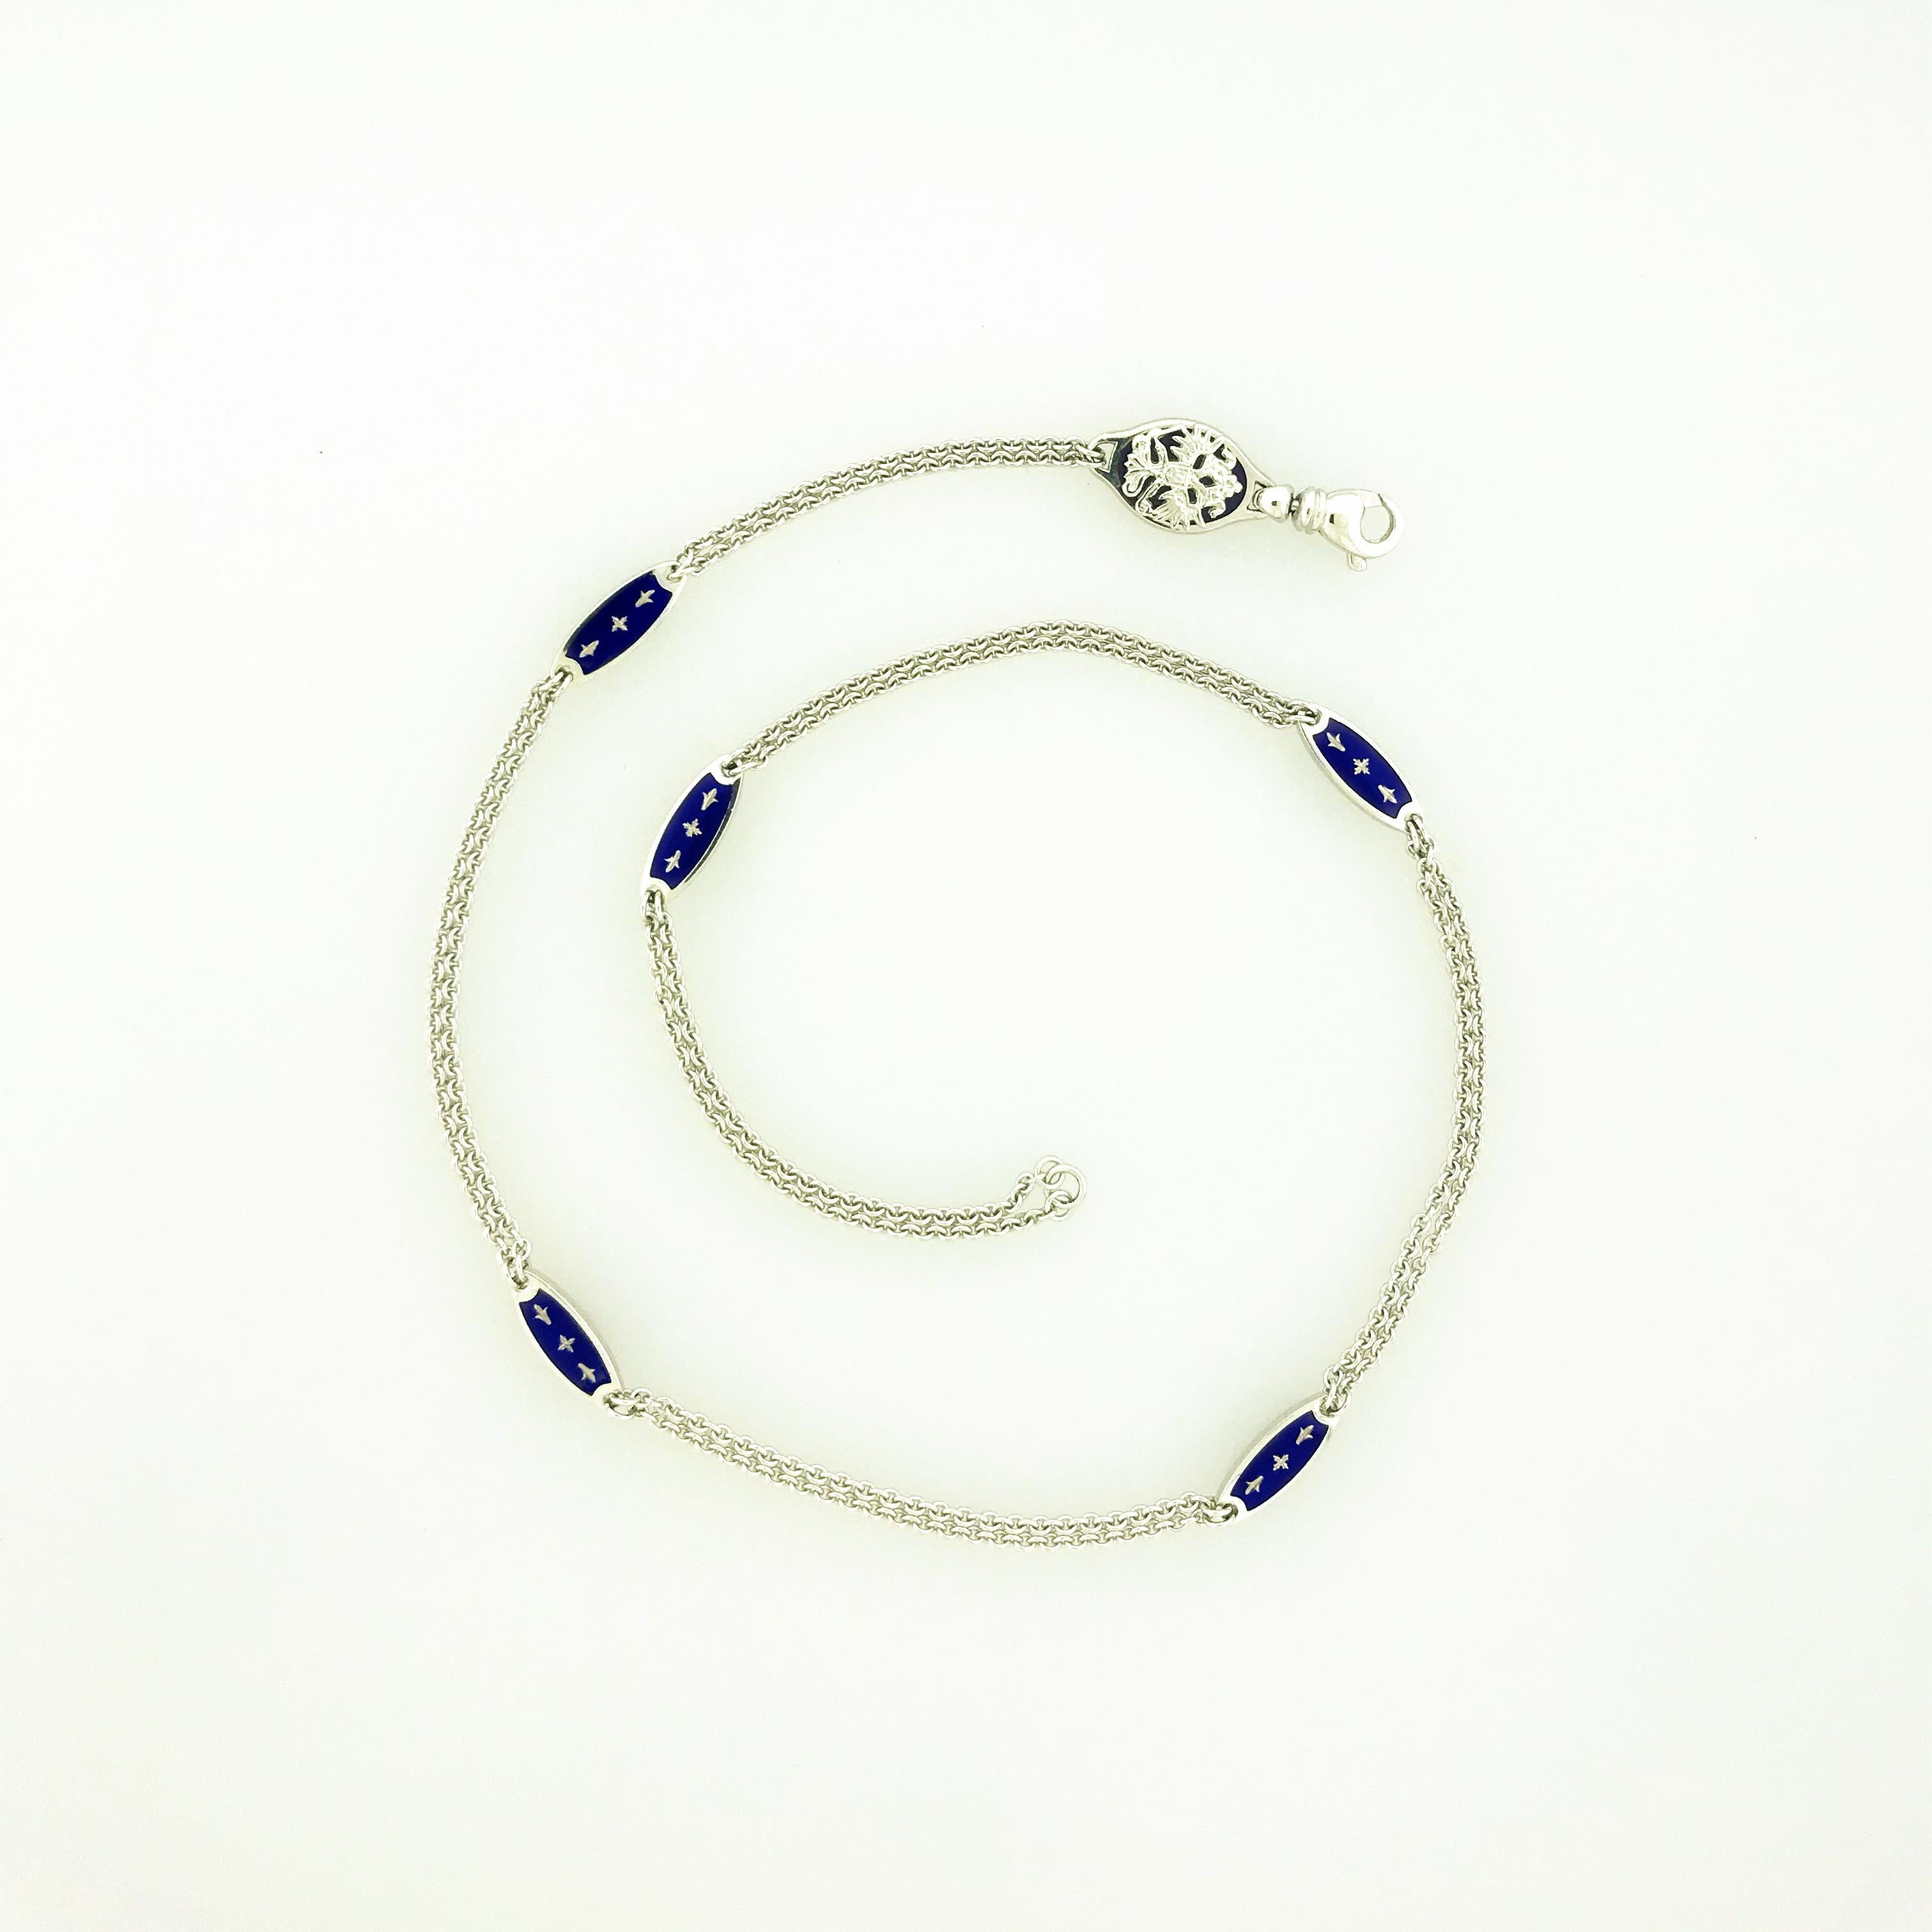 18K white gold limited-edition Fabergé necklace having double fancy link chain between five double-sided cobalt blue enameled oval-shaped elements with 18K white gold decorative paillons, and its Fabergé Crest clasp. The limited-edition chain